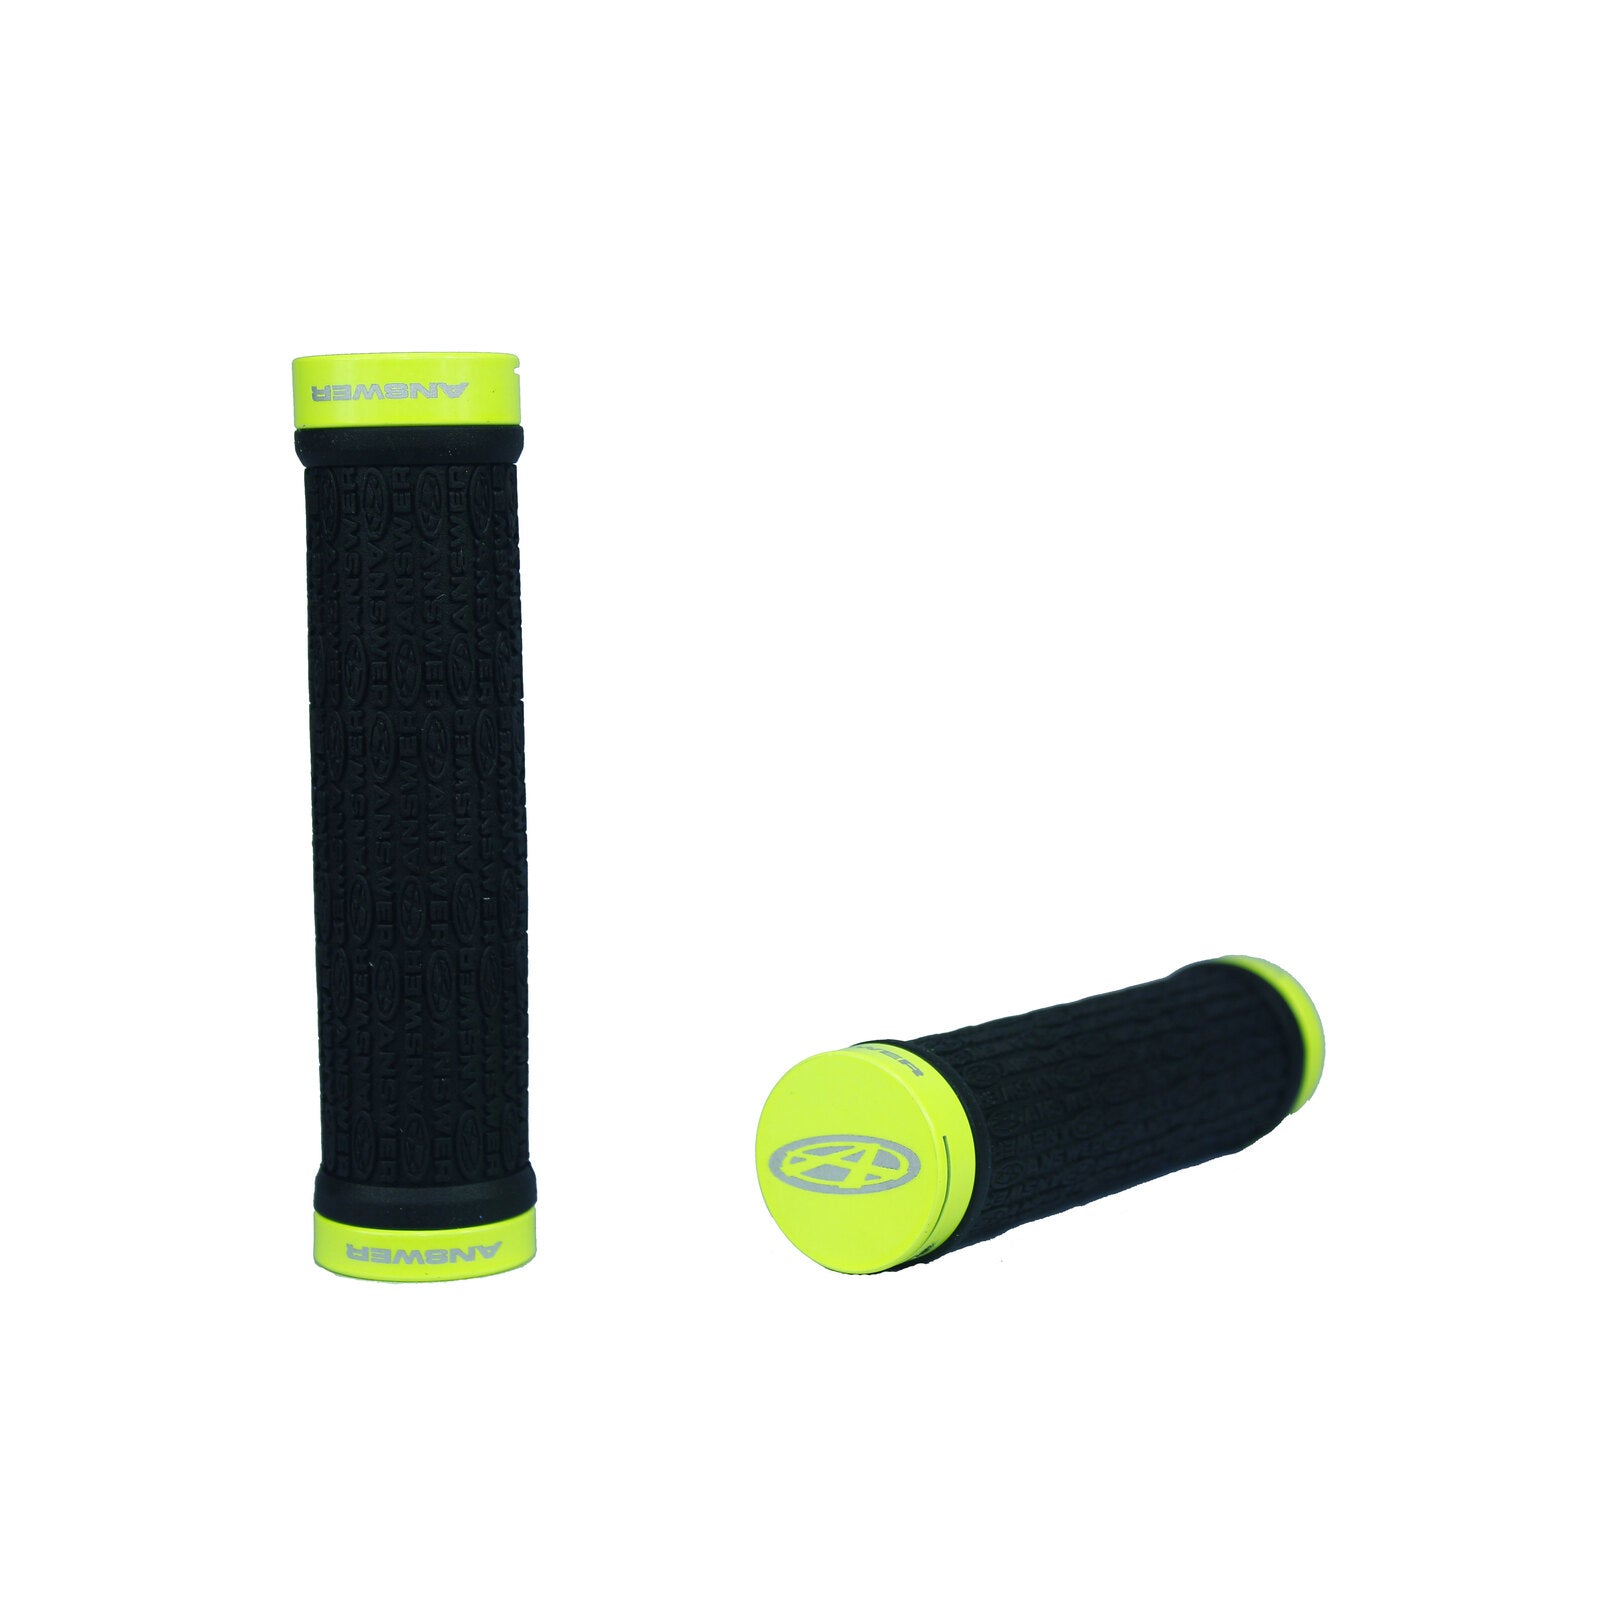 A pair of black and yellow Answer Pro Lock-On Flangless grips on a white background.